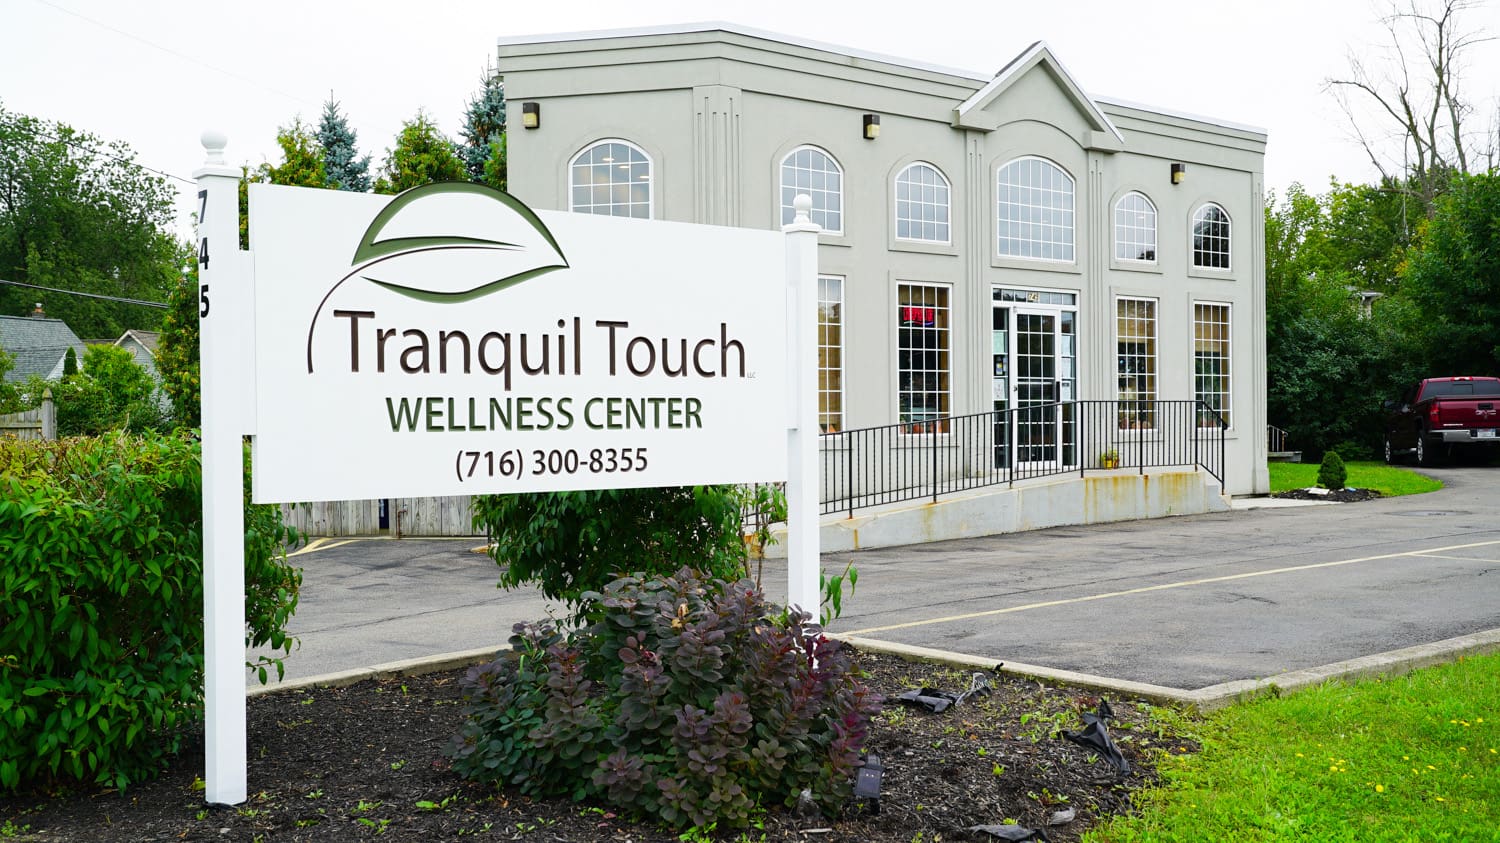 Exterior of Tranquil Touch Wellness Center